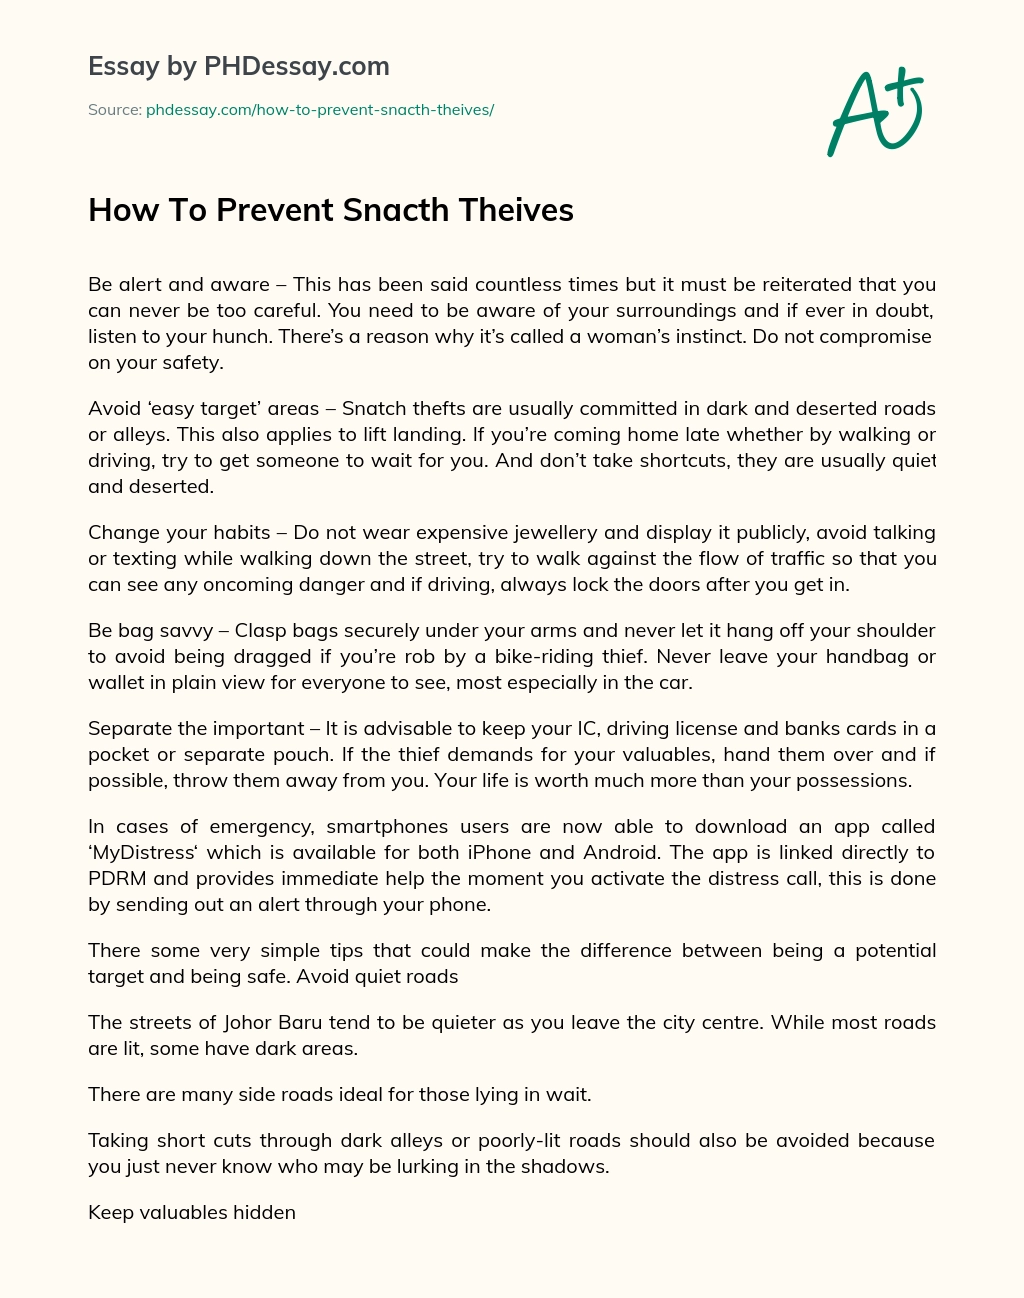 How To Prevent Snacth Theives essay